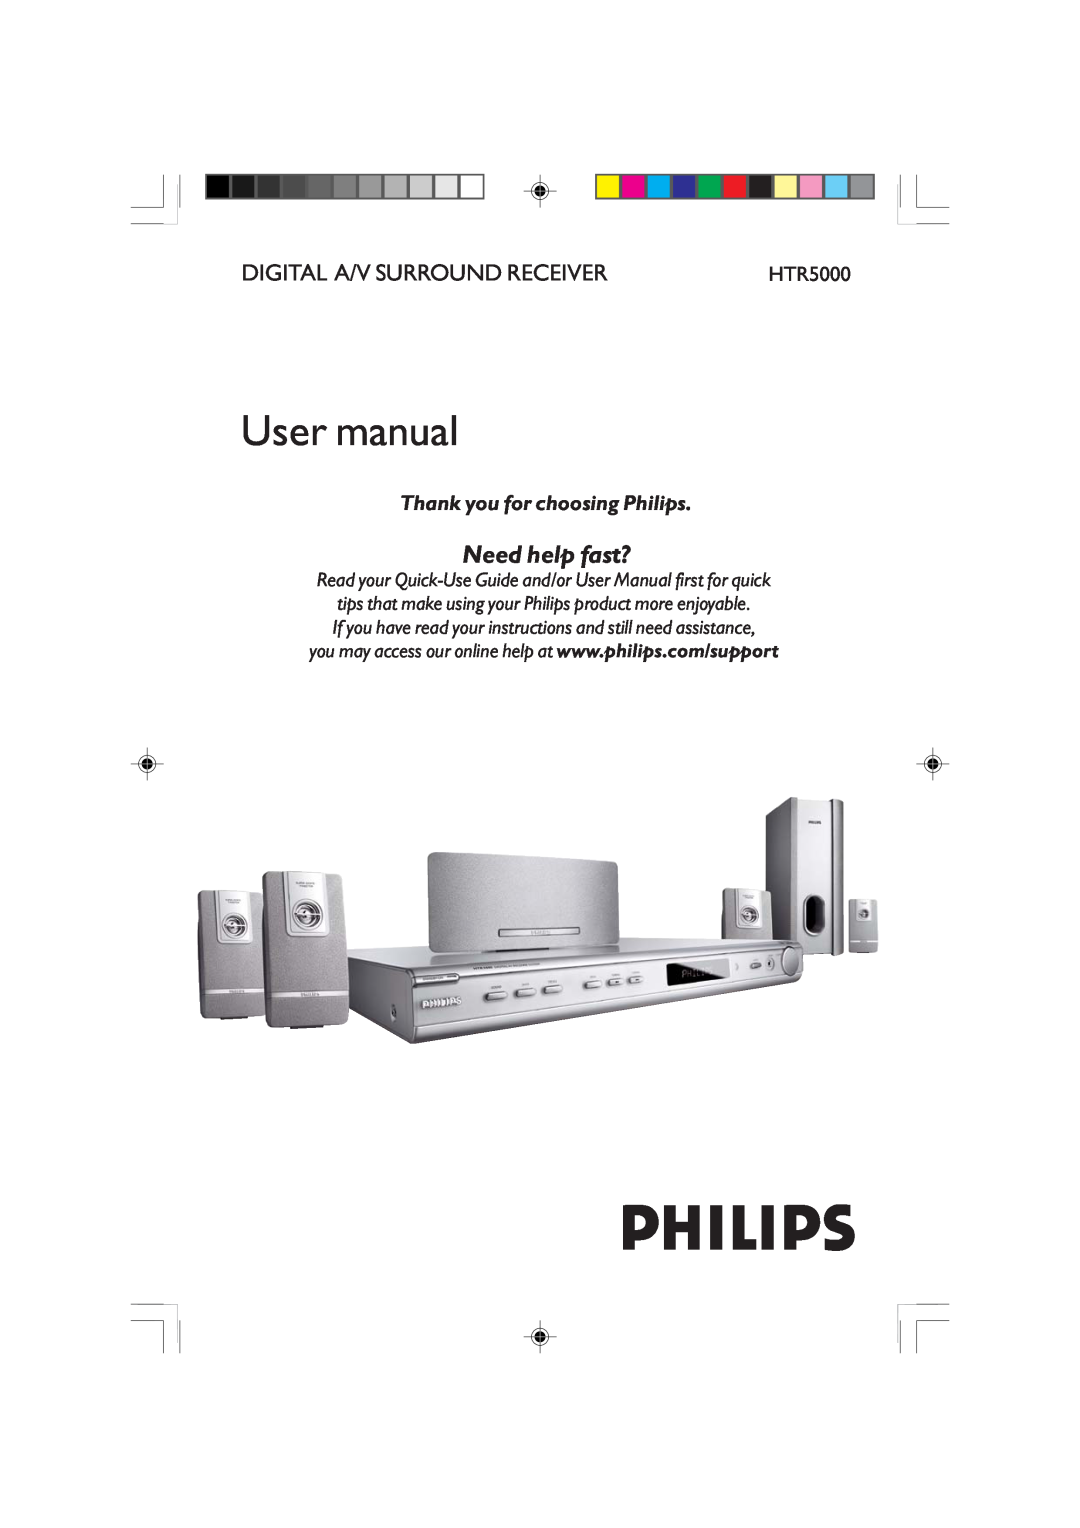 Philips HTR5000 user manual Thank you for choosing Philips, Need help fast?, Digital A/V Surround Receiver 